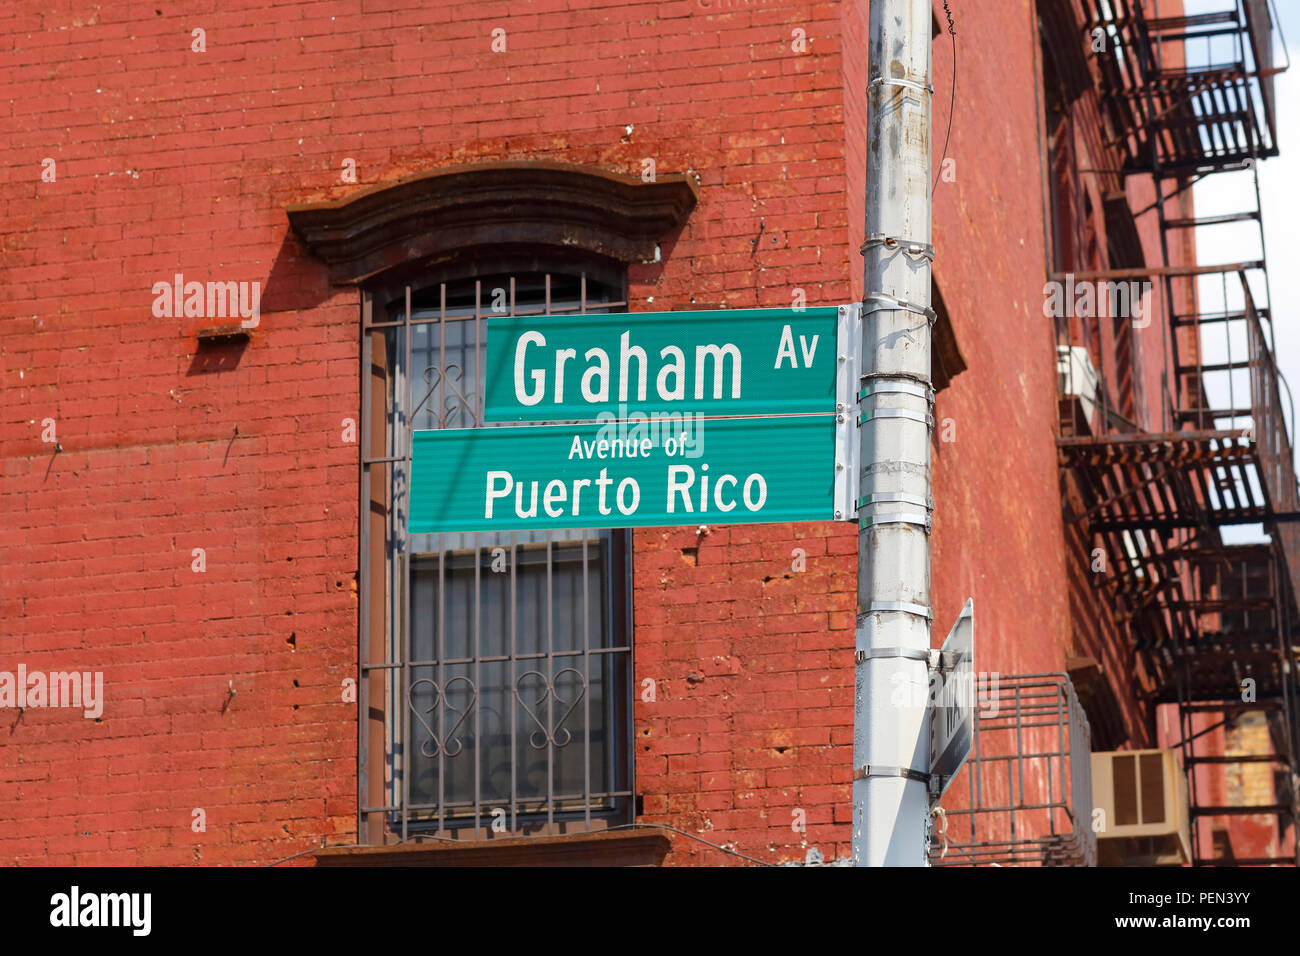 The Avenue of Puerto Rico, or Graham Ave, street signs in Brooklyn, New York. Stock Photo